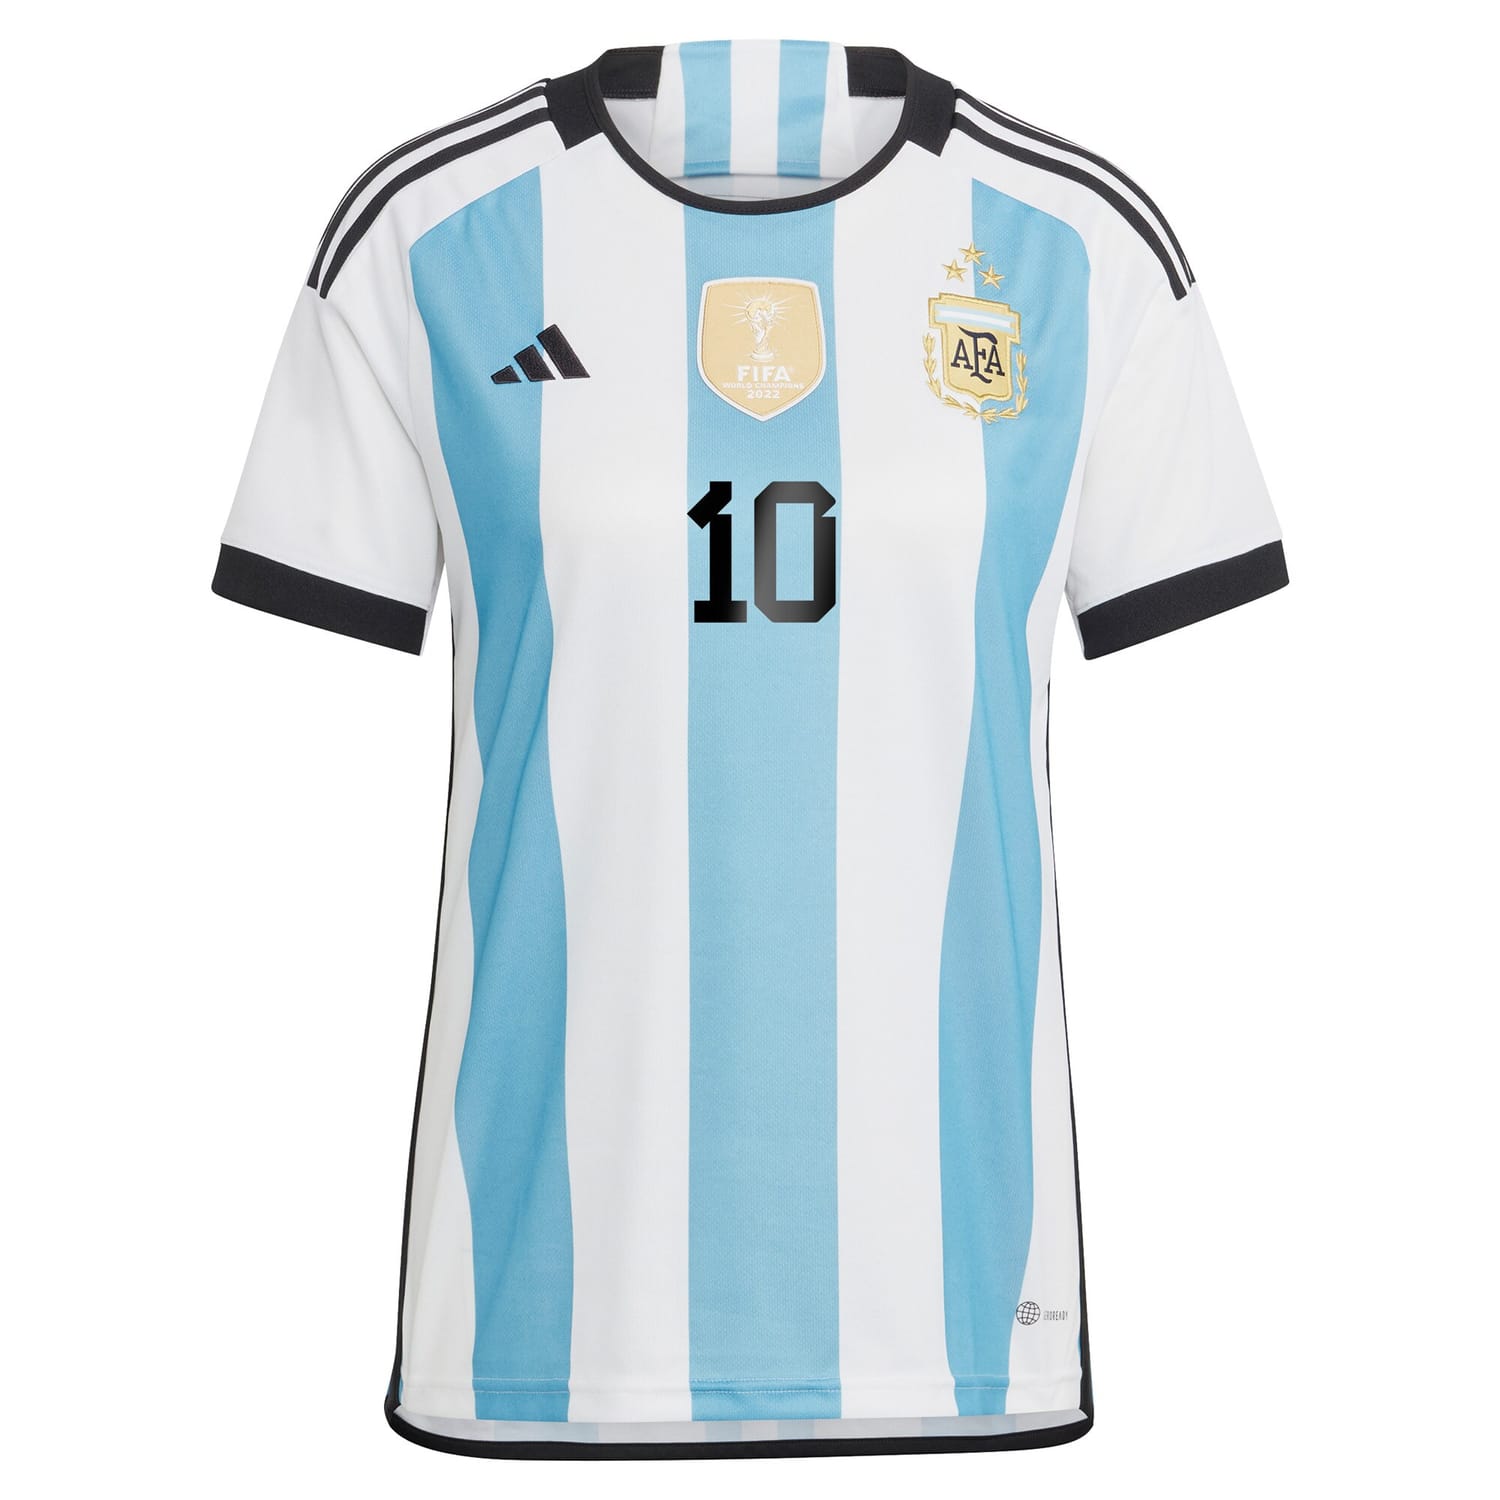 Argentina National Team Home Winners Jersey Shirt White/Light Blue 2022 player Lionel Messi printing for Women